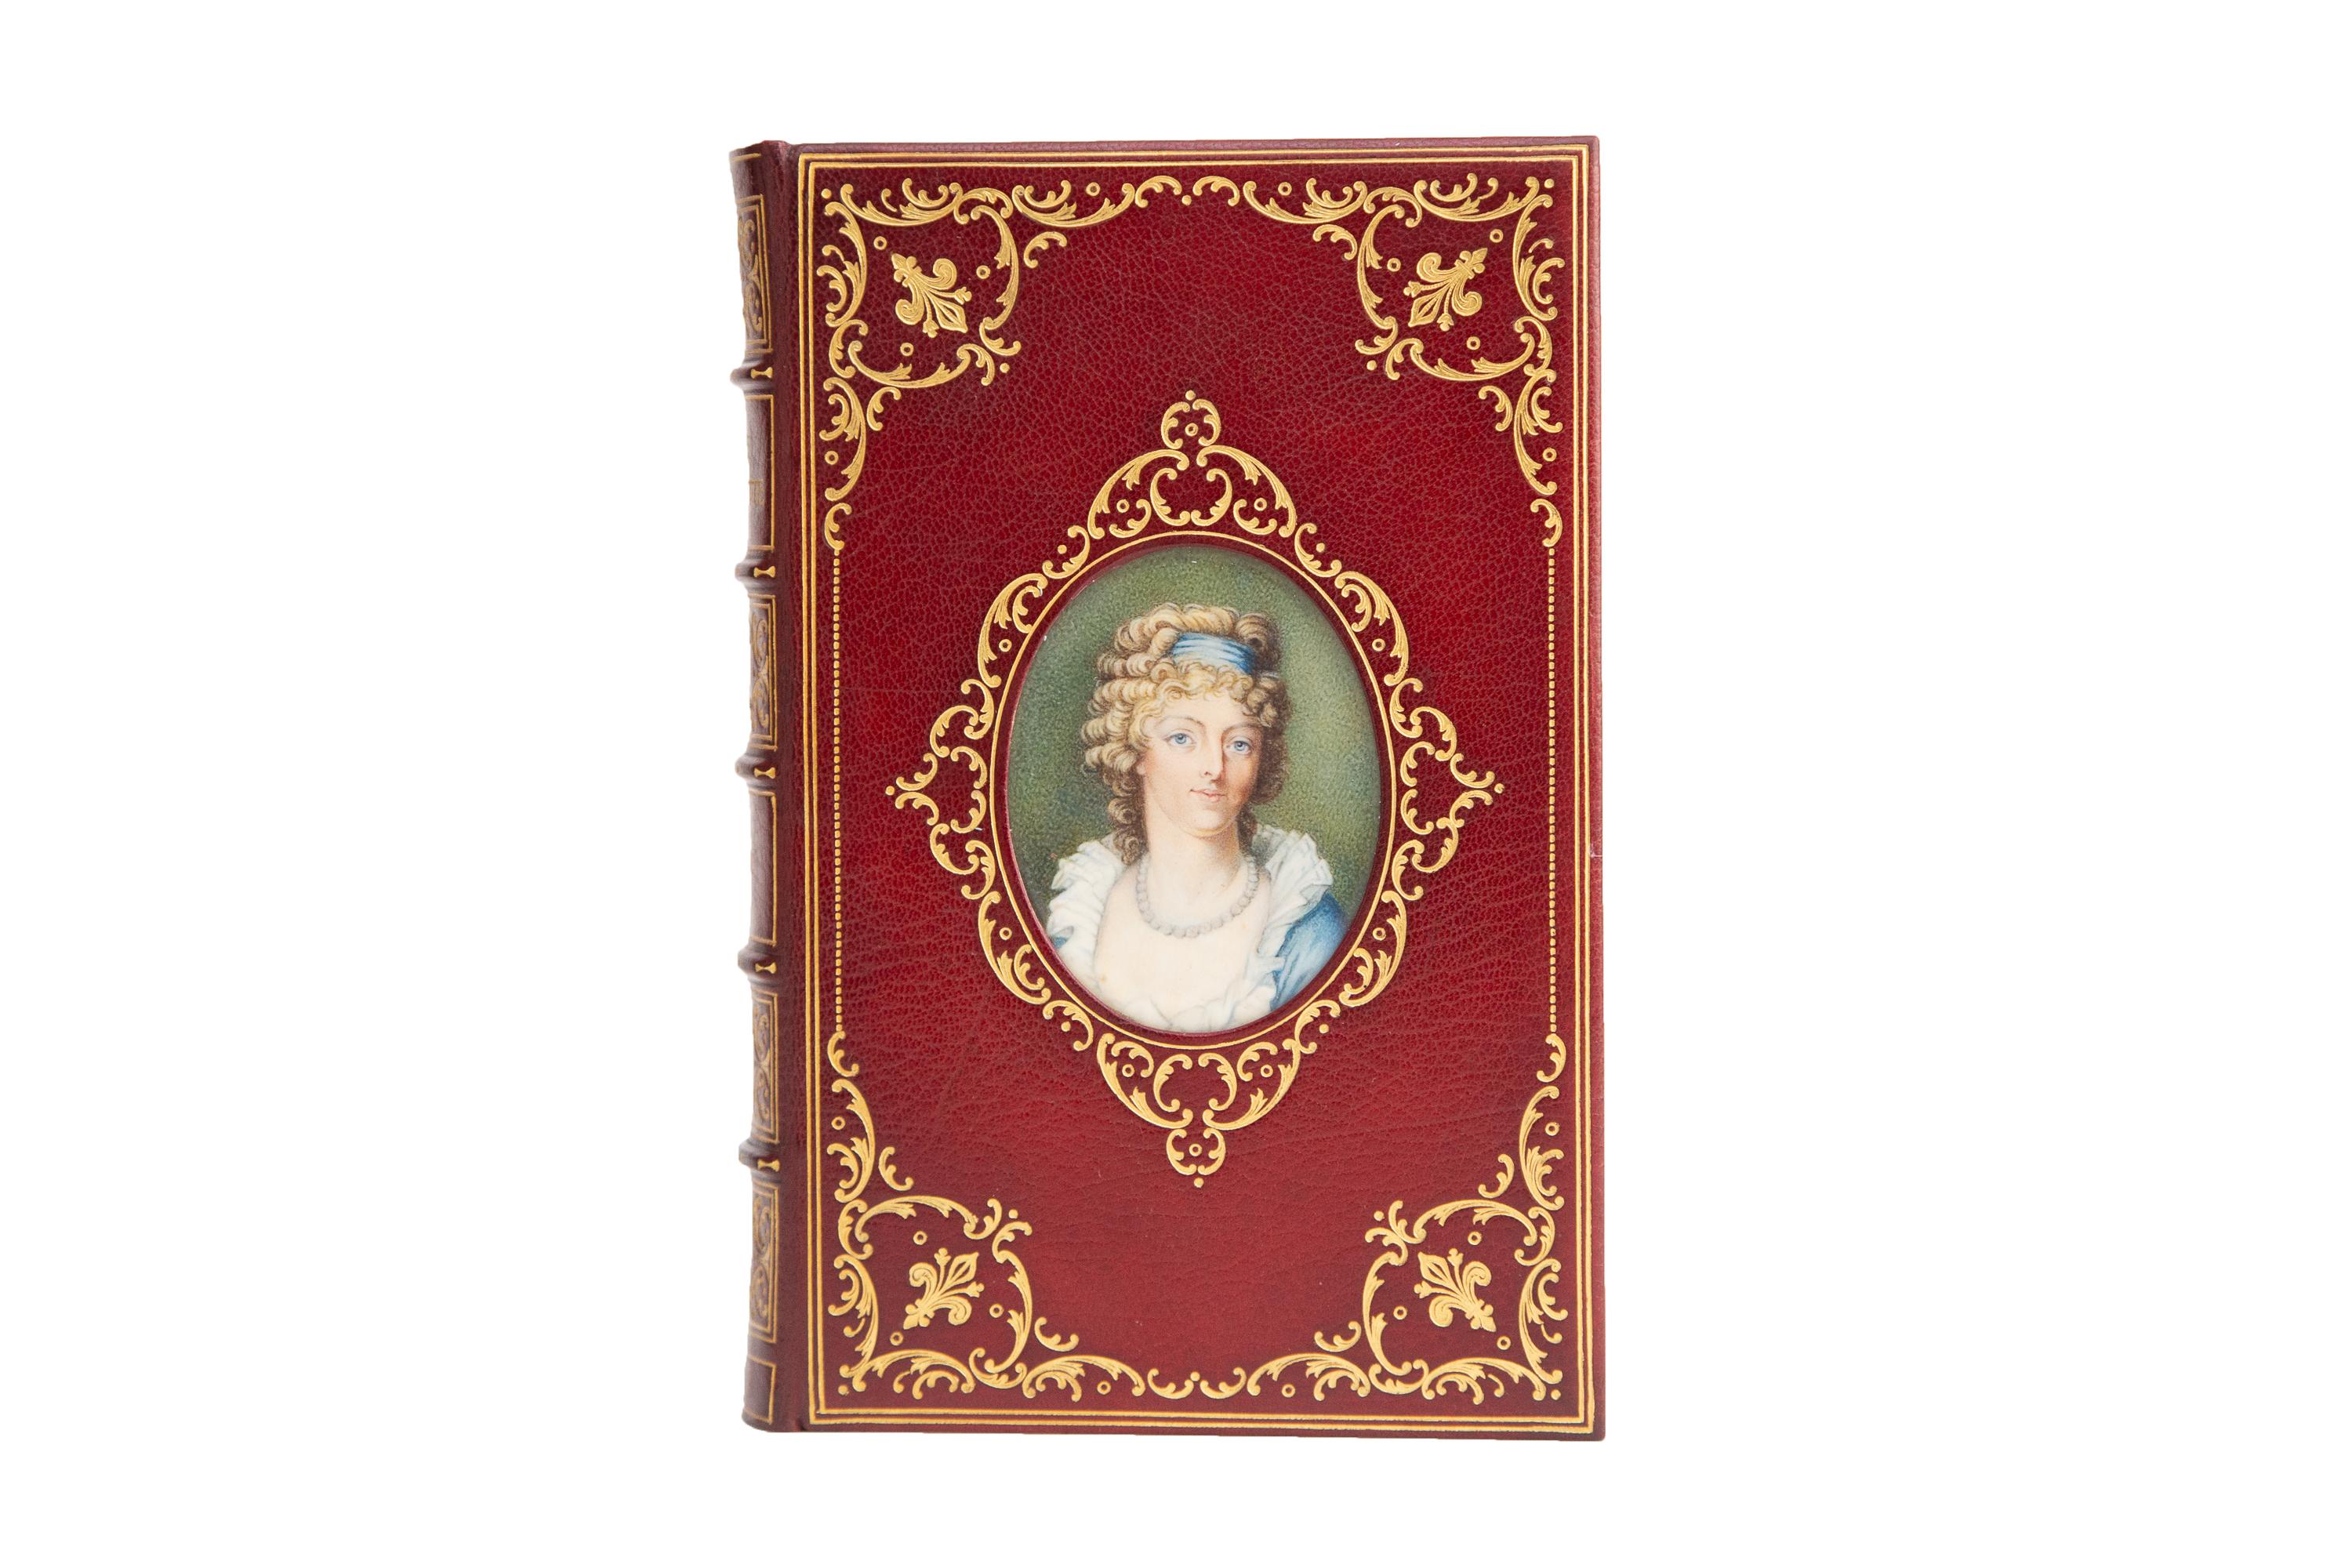 1 Volume. Hilaire Belloc, Marie Antoinette. First Edition. A lovely Cosway-style binding by Bayntun-Riviere. Bound in full red crushed morocco with the cover displaying an insert portrait of Marie Antoinette under glass bordered in ornate